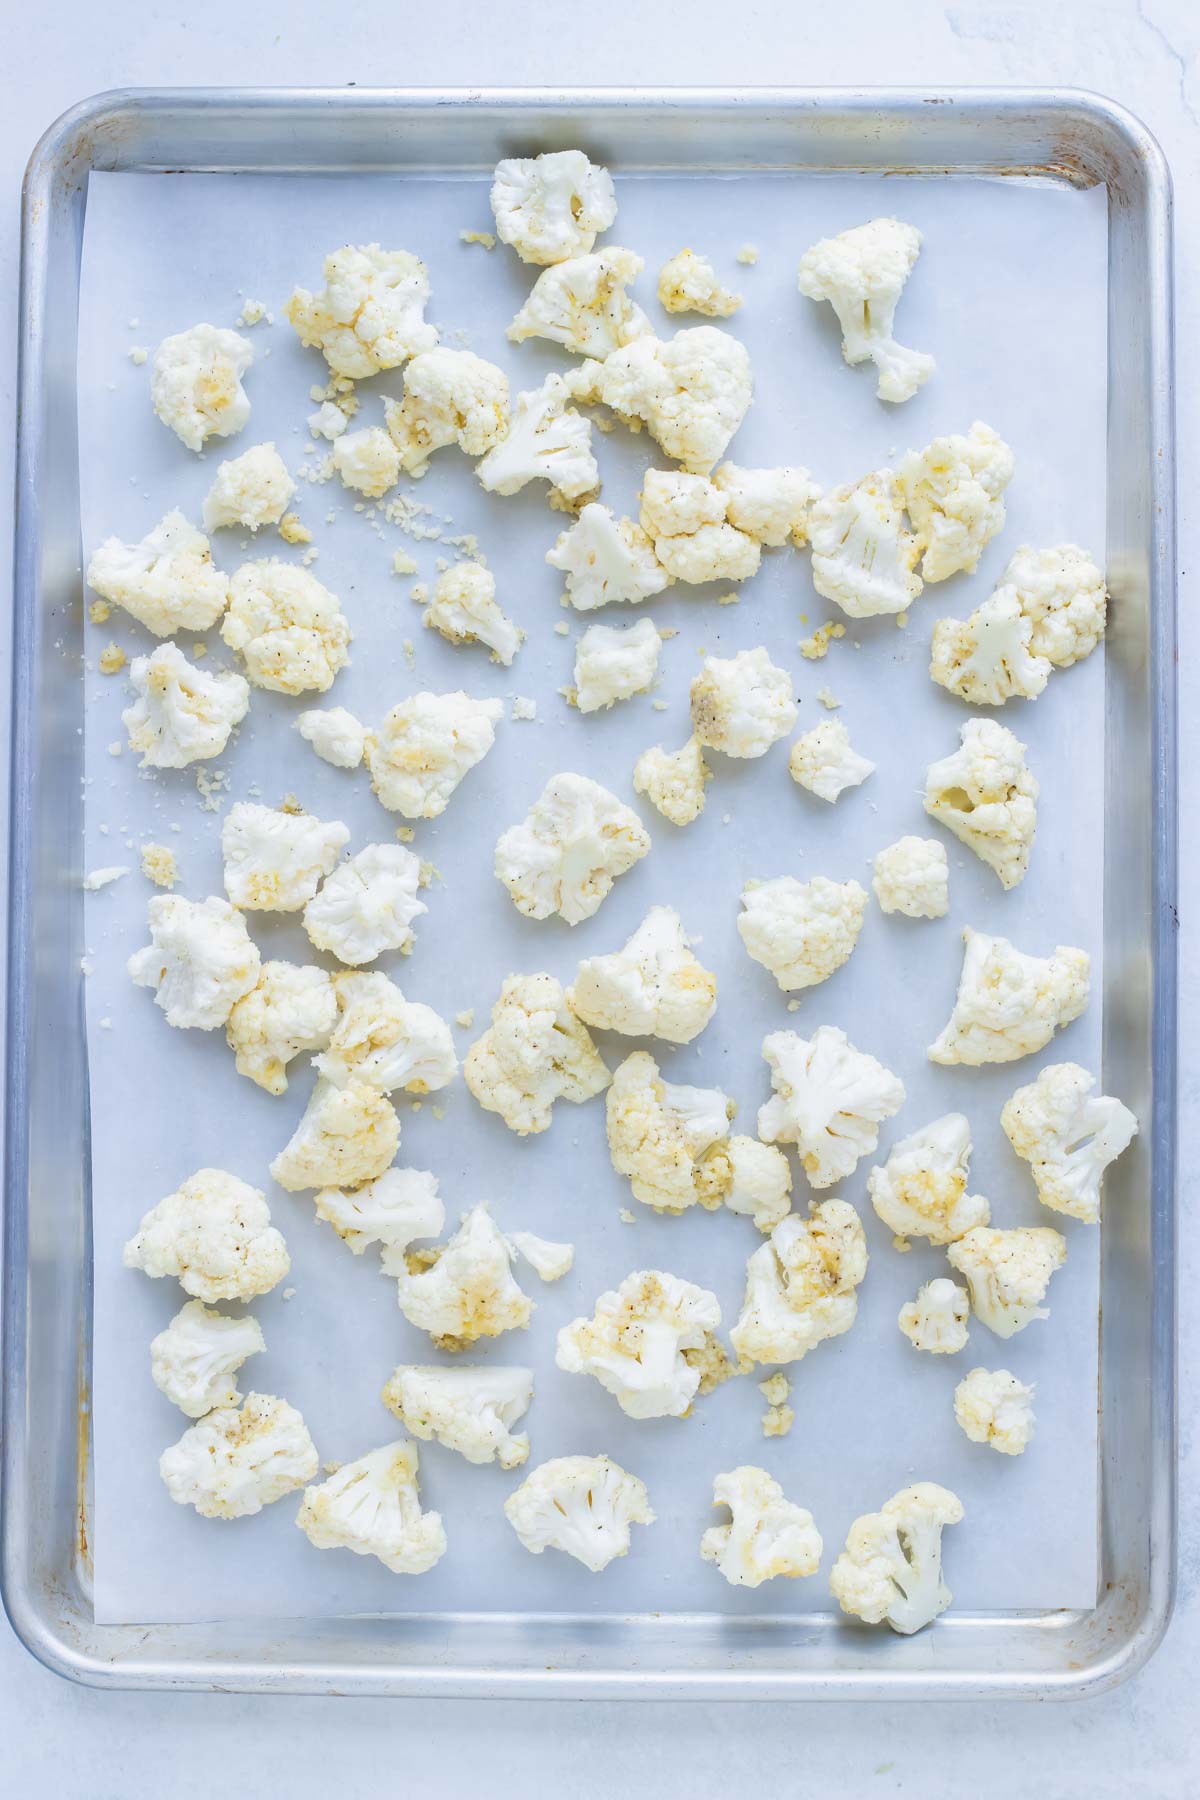 Parmesan roasted cauliflower is baked in the oven for a flavorful side.